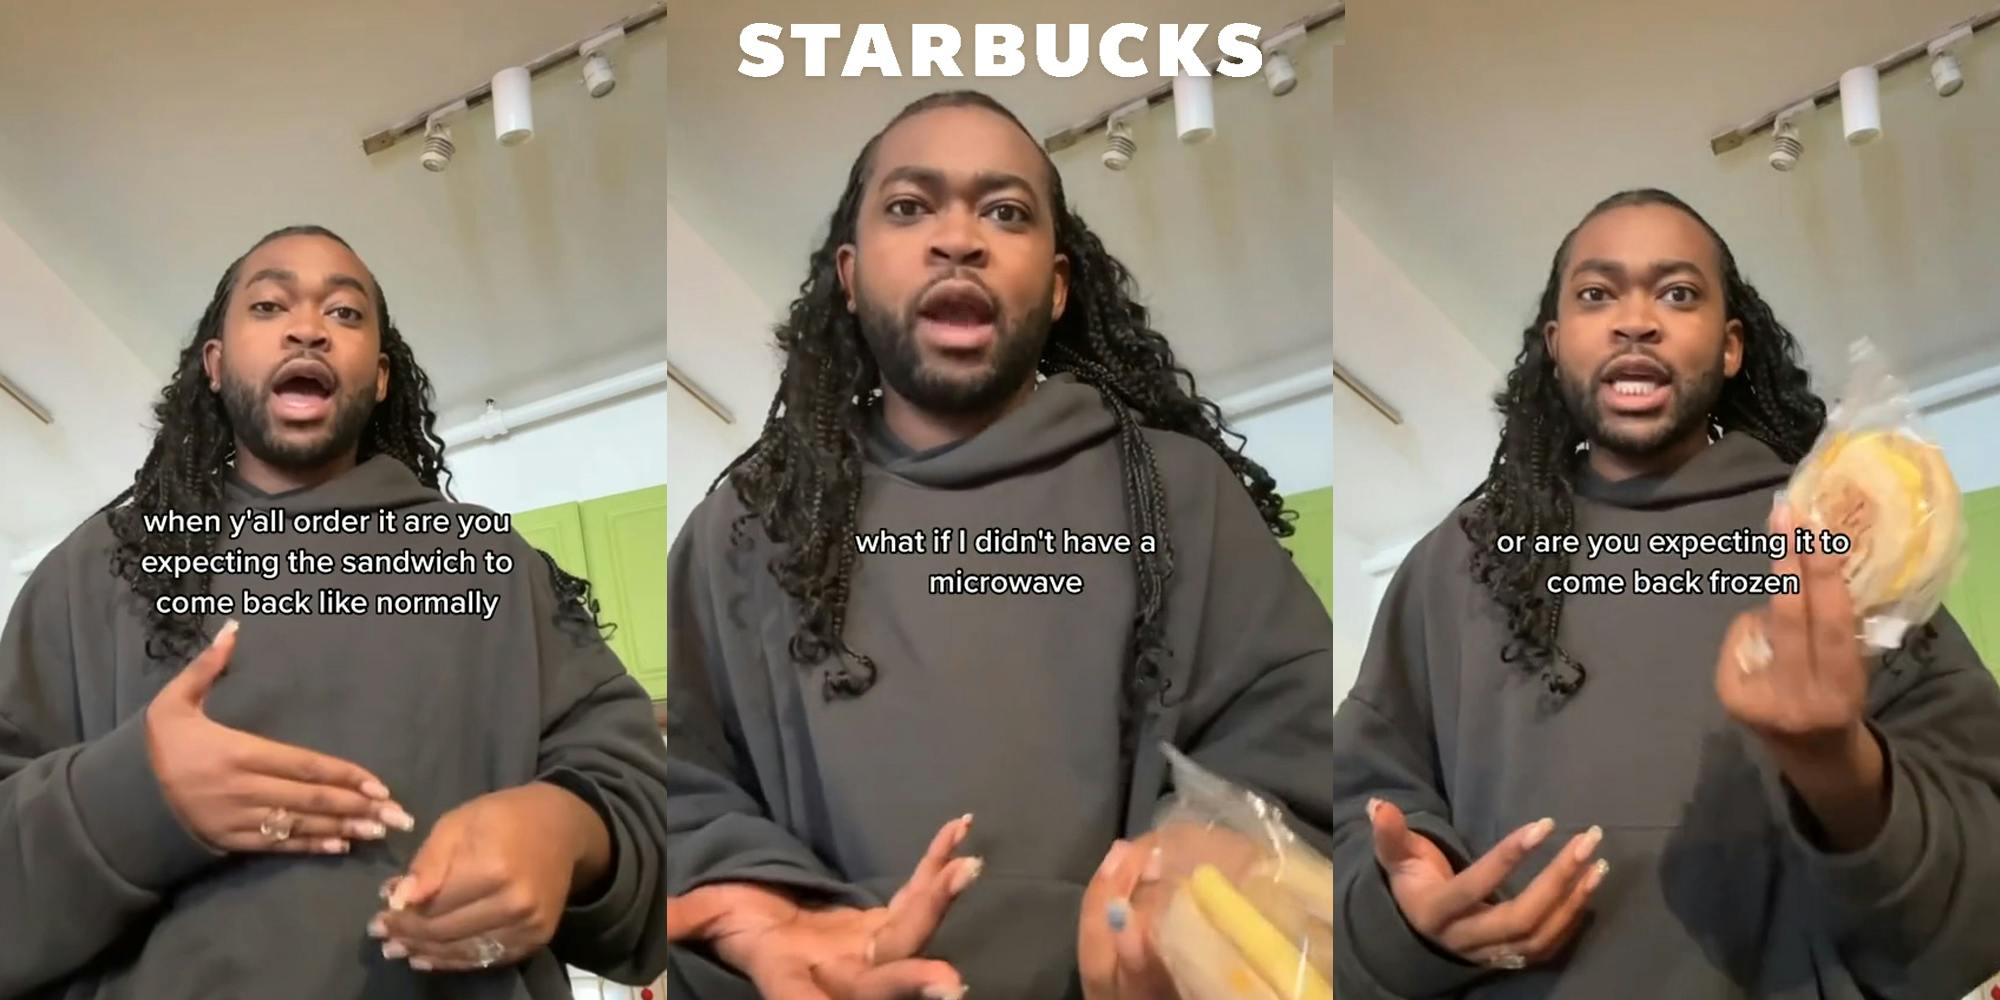 person speaking holding Starbucks sandwich with caption "when y'all order it are you expecting the sandwich to come back like normally" (l) person speaking with caption "what if I didn't have a microwave" with Starbucks logo above (c) person speaking holding Starbucks sandwich with caption "or are you expecting it to come back frozen" (r)